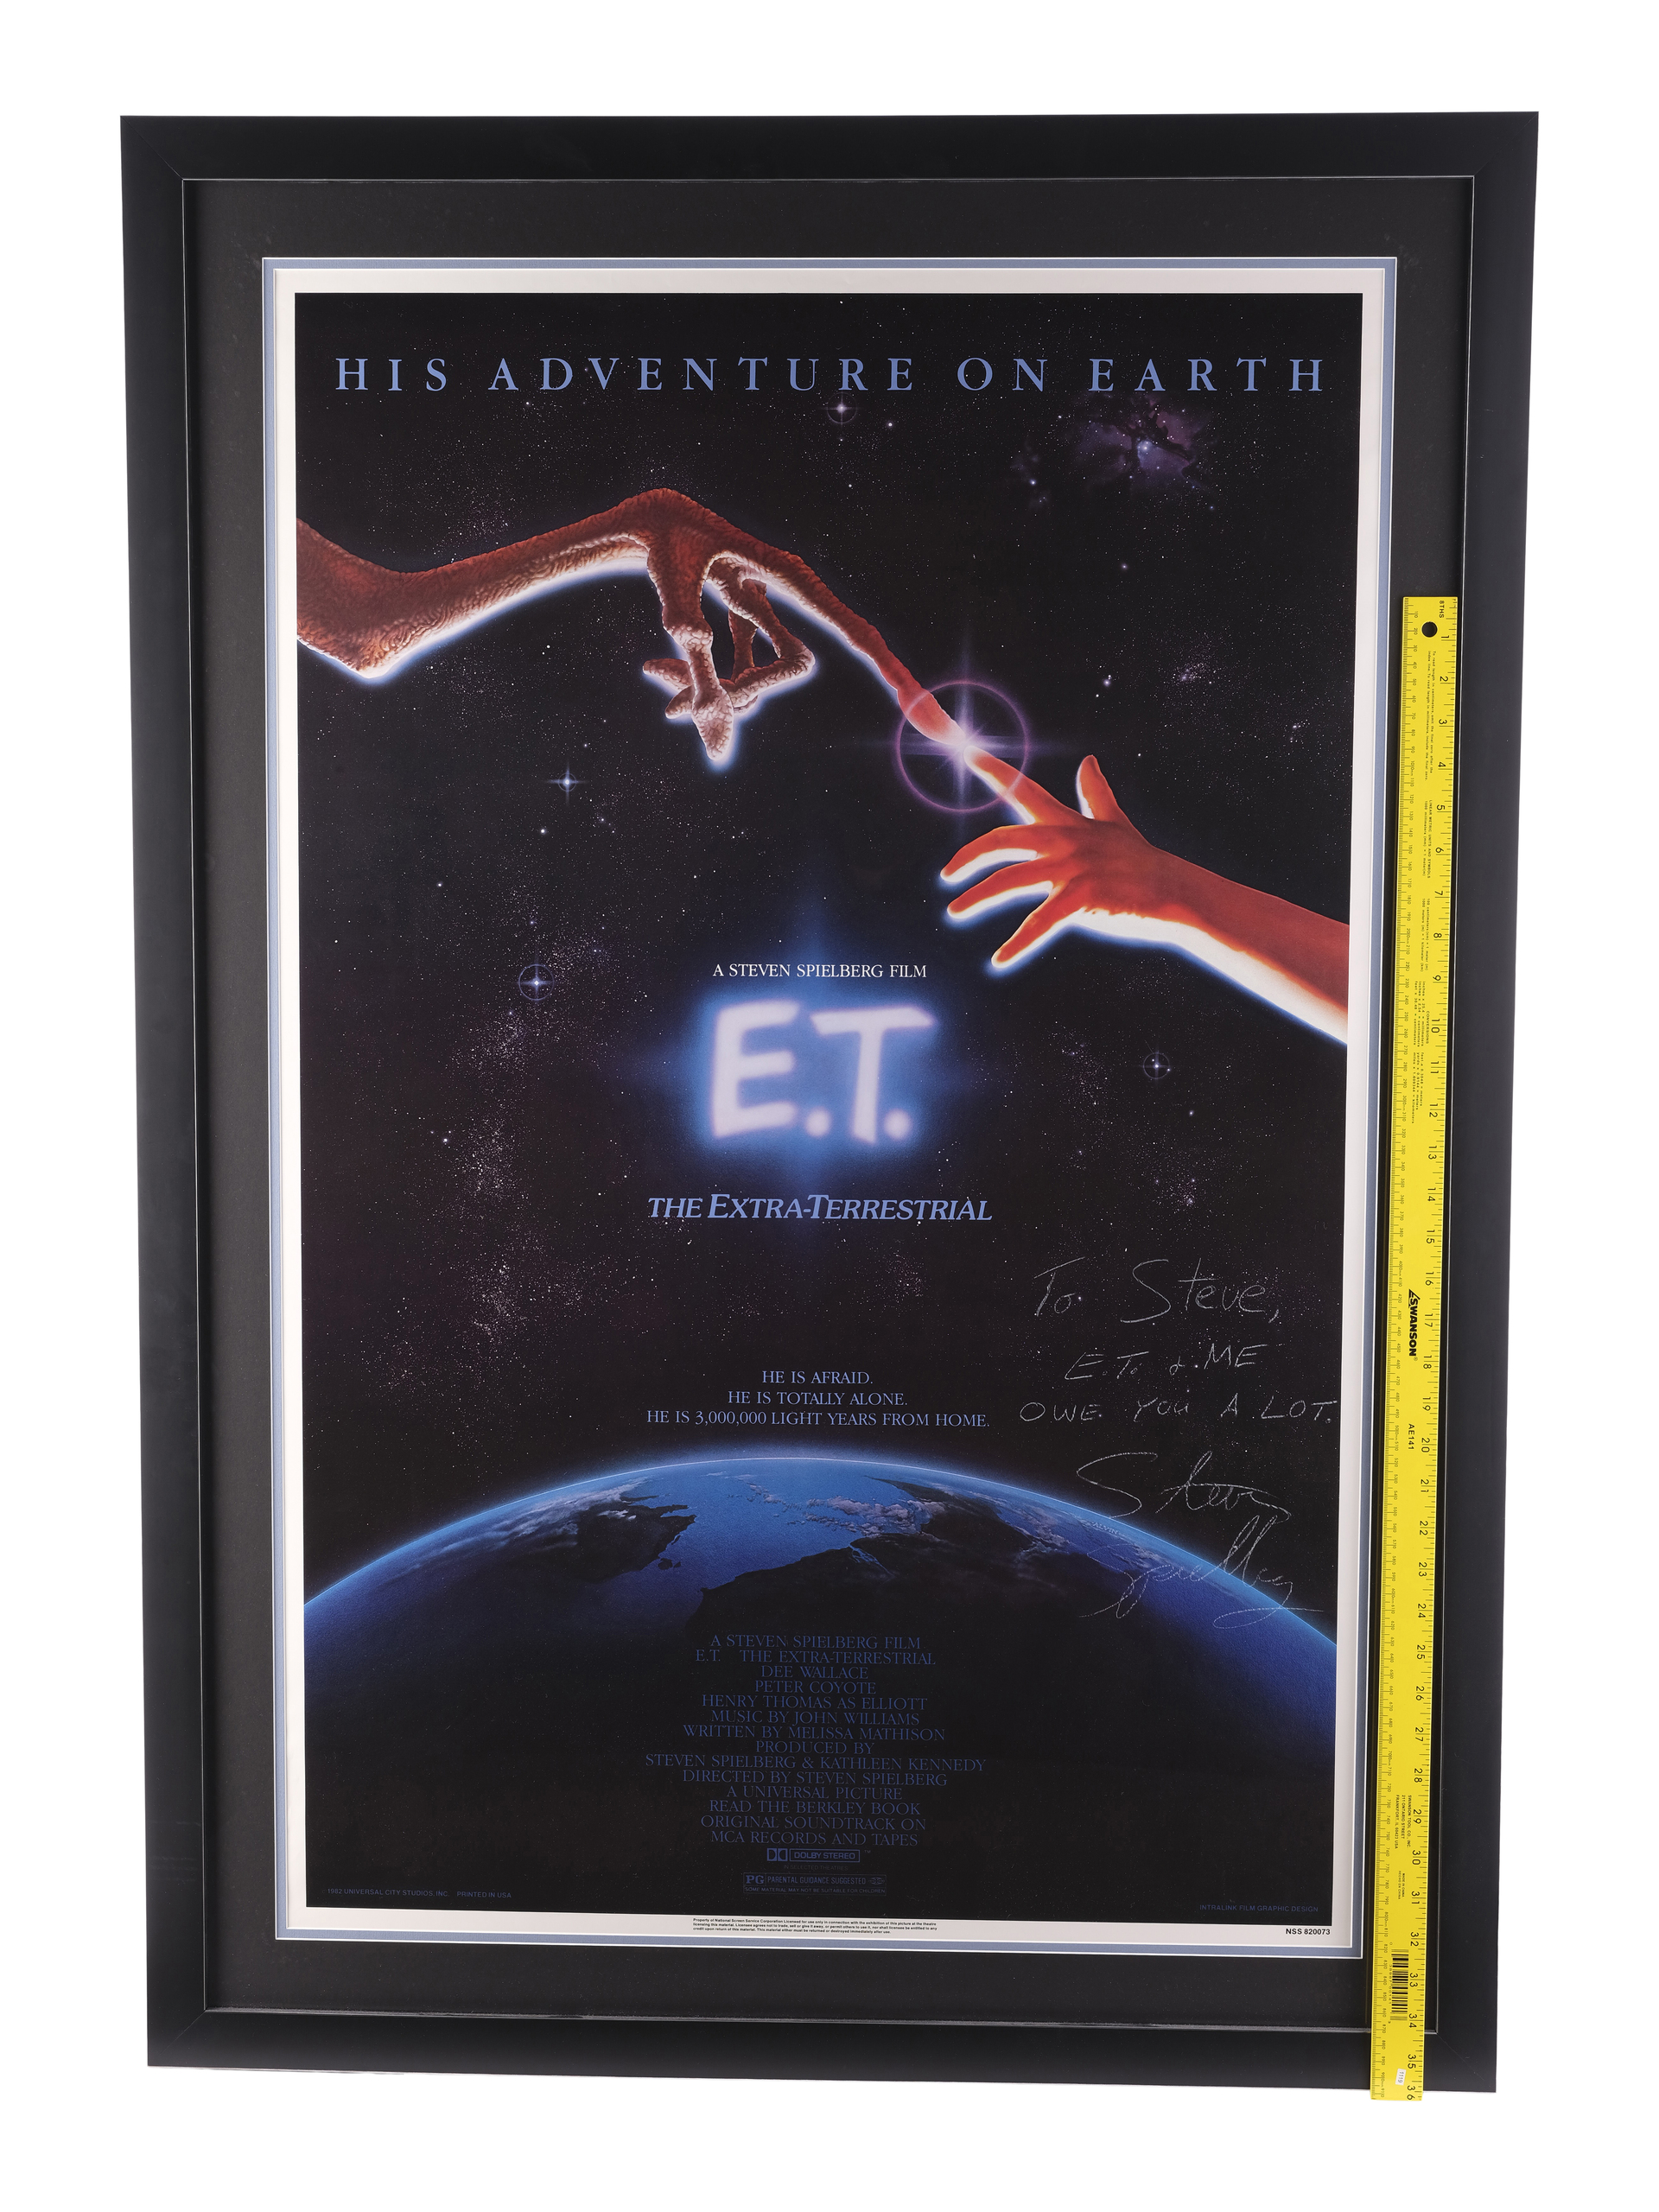 E.T. THE EXTRA-TERRESTRIAL (1982) - Framed Steven Spielberg-Autographed "Touching Fingers" One-Sheet - Image 5 of 5